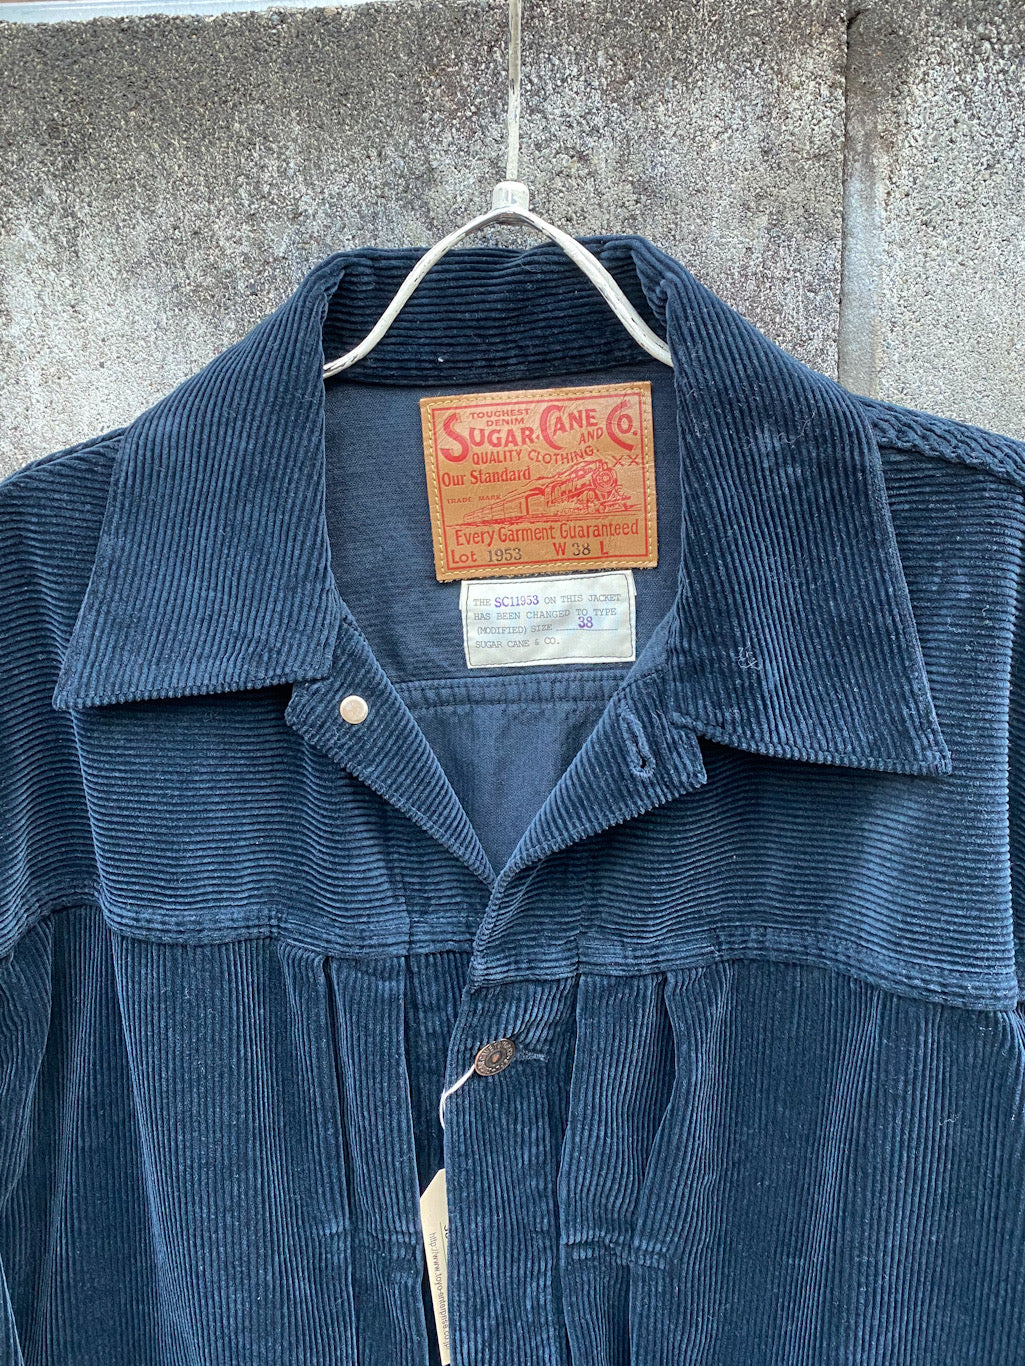 Corduroy Jacket Over Size 1953 MODEL PIGMENT DYED